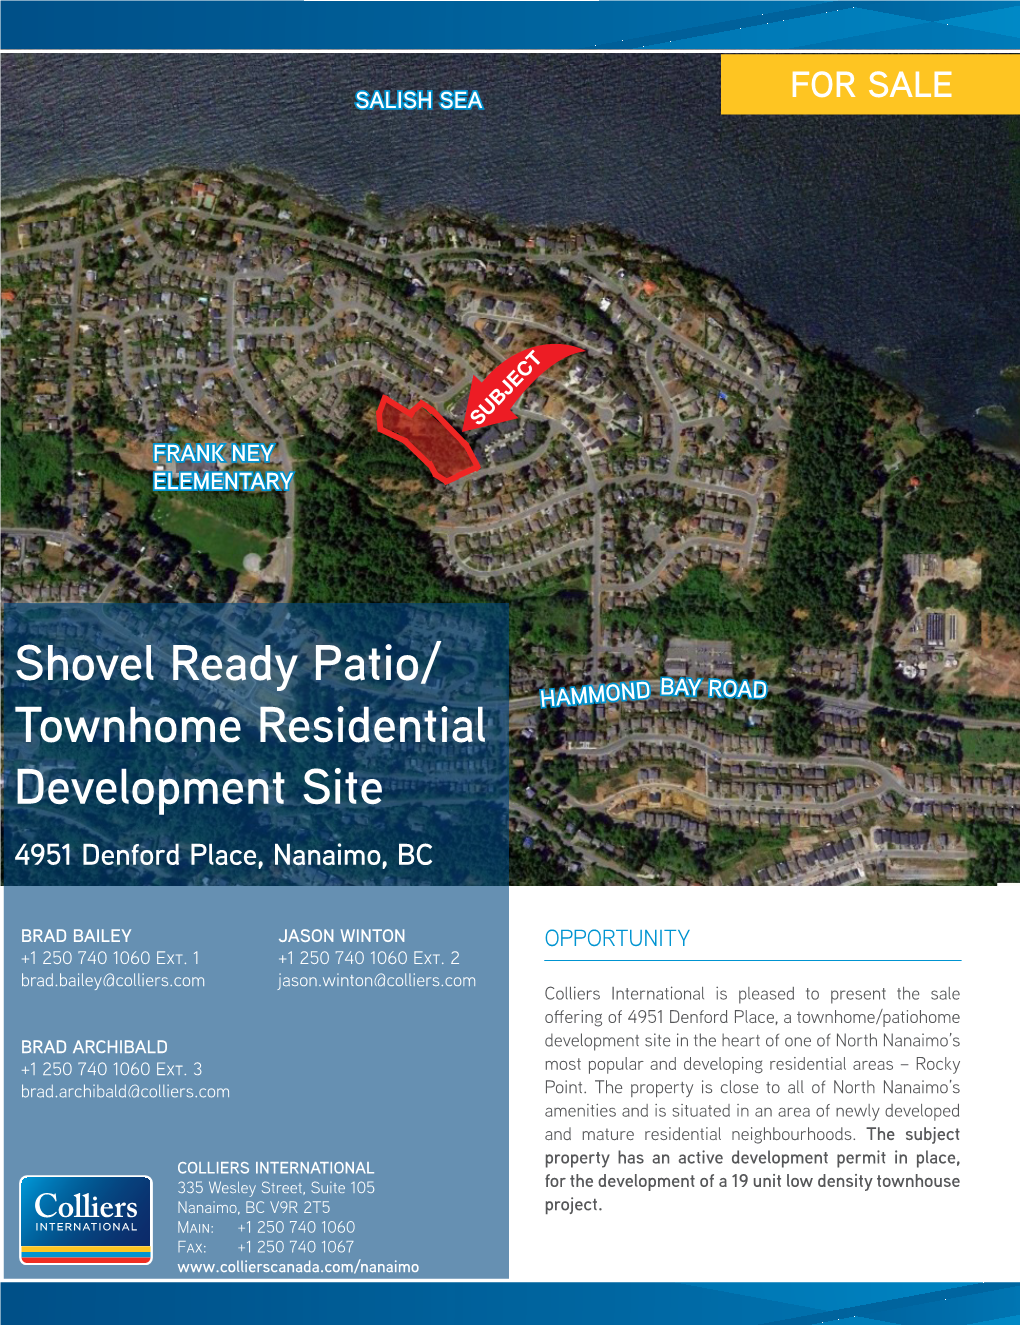 Shovel Ready Patio/ Townhome Residential Development Site 4951 Denford Place, Nanaimo, BC